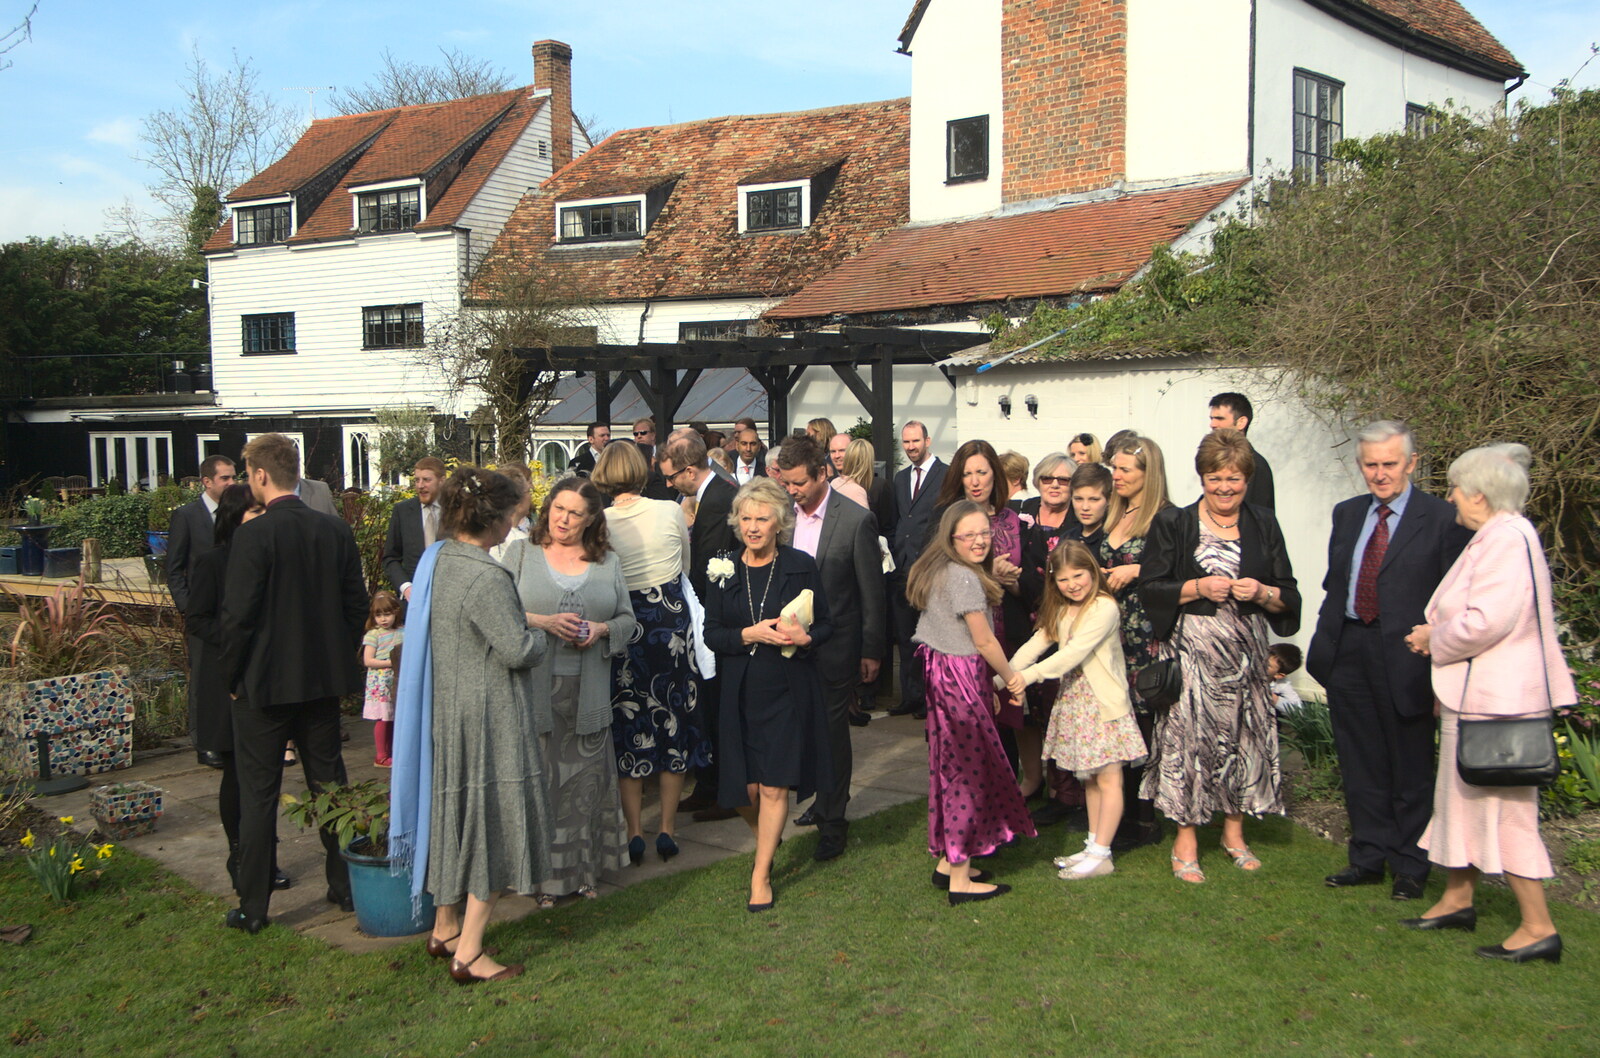 Guests outside the venue from John and Caroline's Wedding, Sheene Mill, Melbourne, Cambridgeshire - 8th March 2014